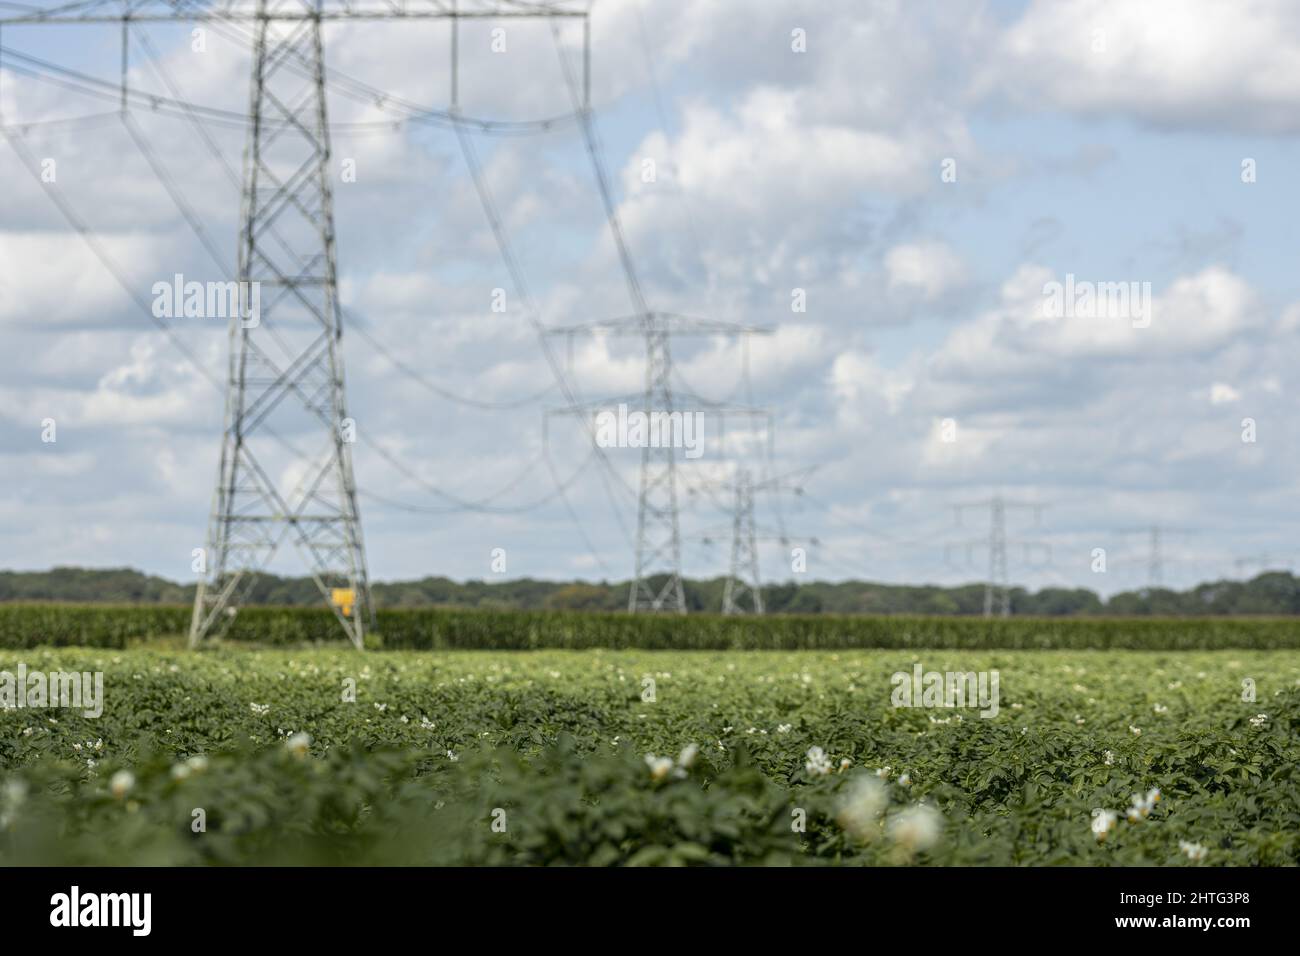 Farmland with electricity towers Stock Photo